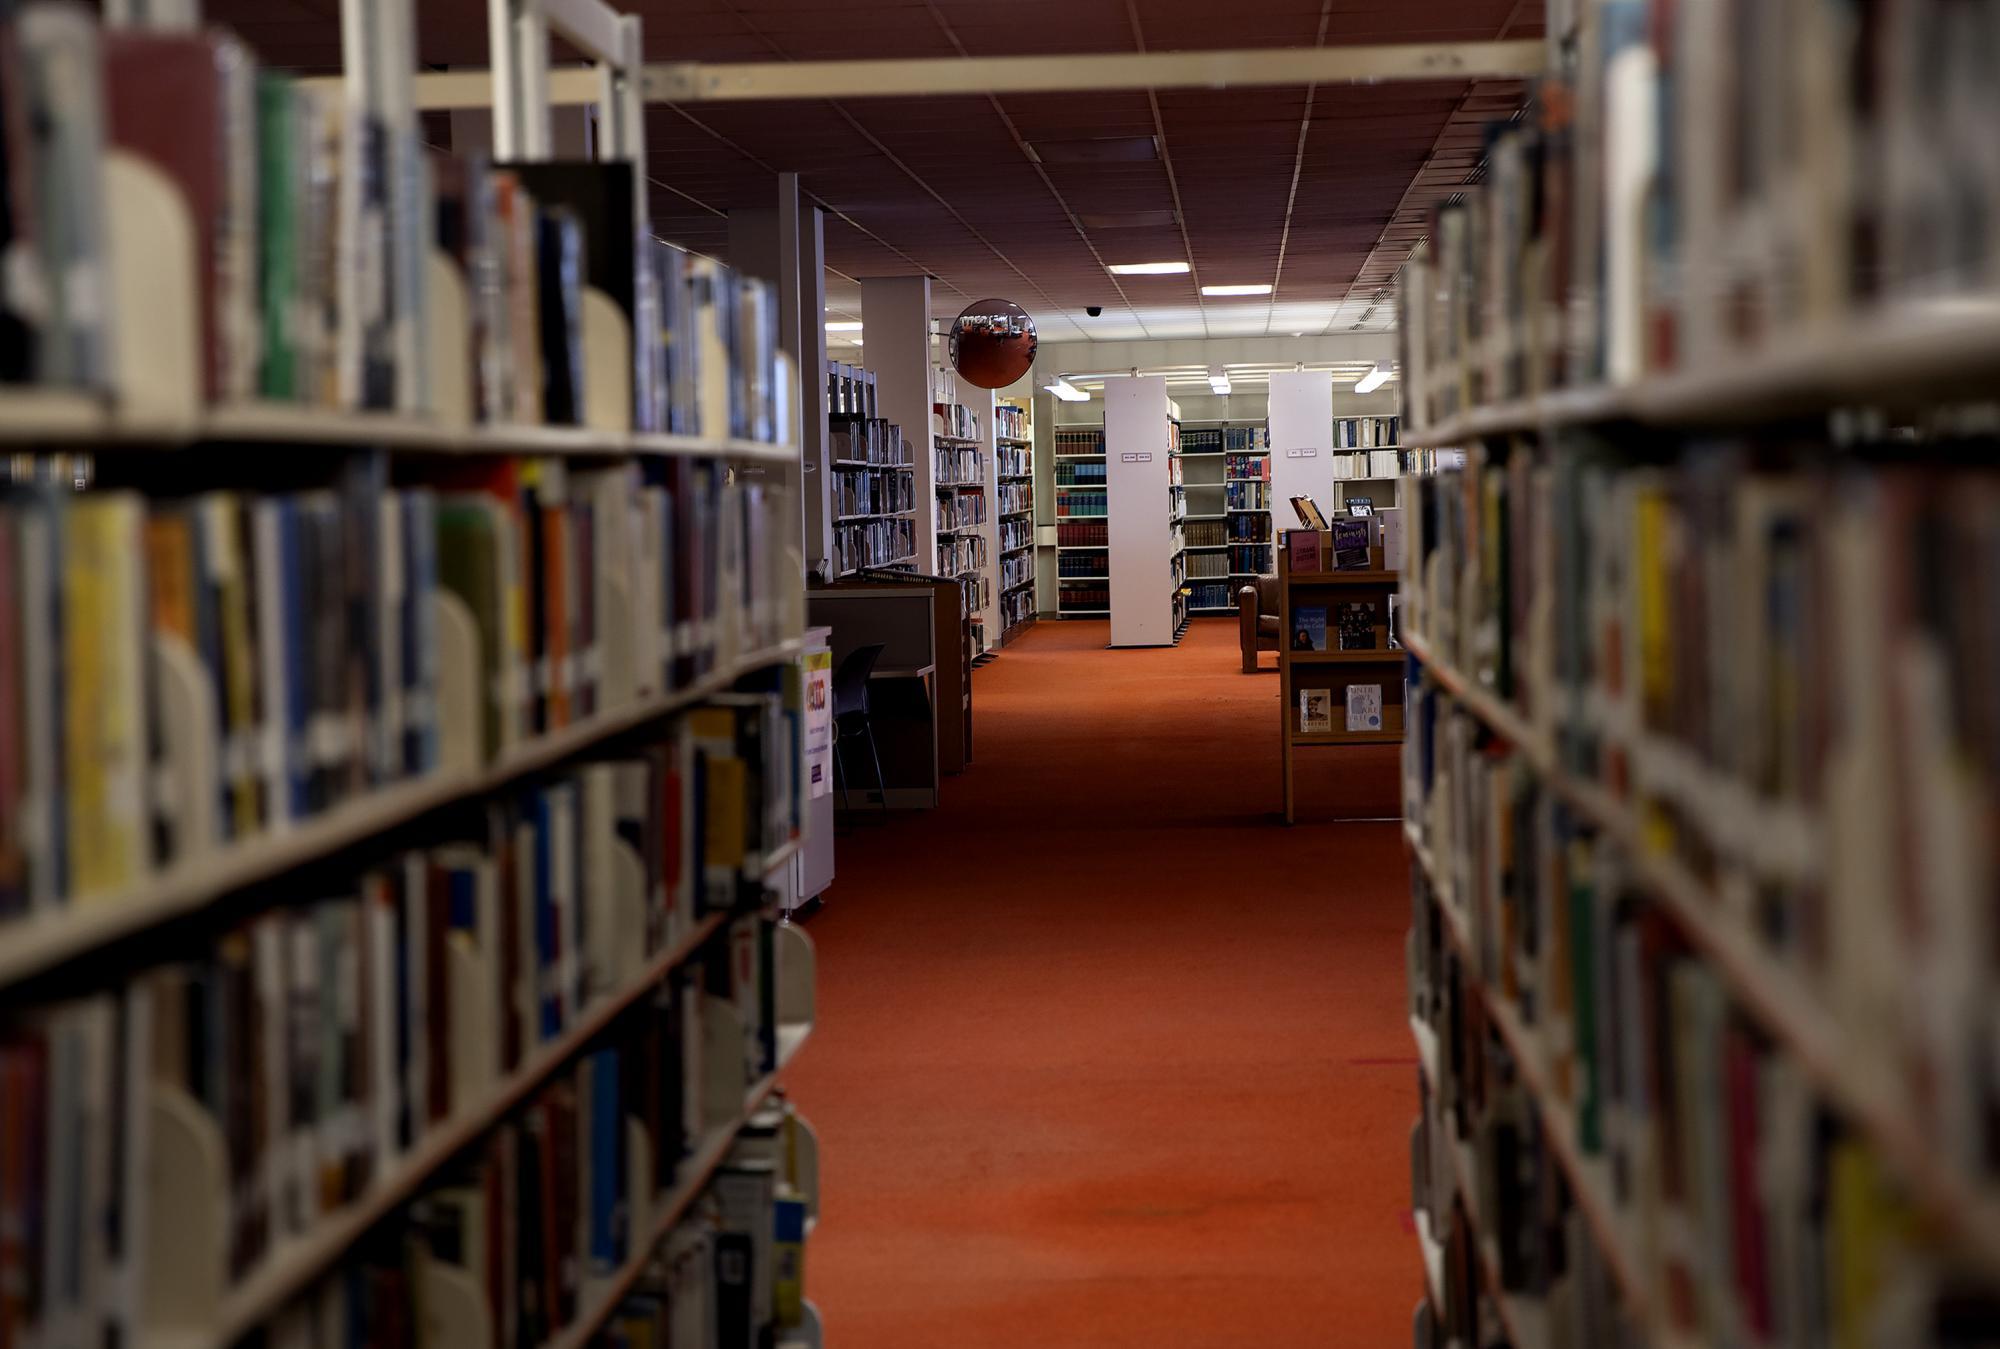 PORTLAND, ME - MAY 4: Book stacks on the ground floor of the Portland Public Library. (Staff photo by Derek Davis/Portland Press Herald via Getty Images)